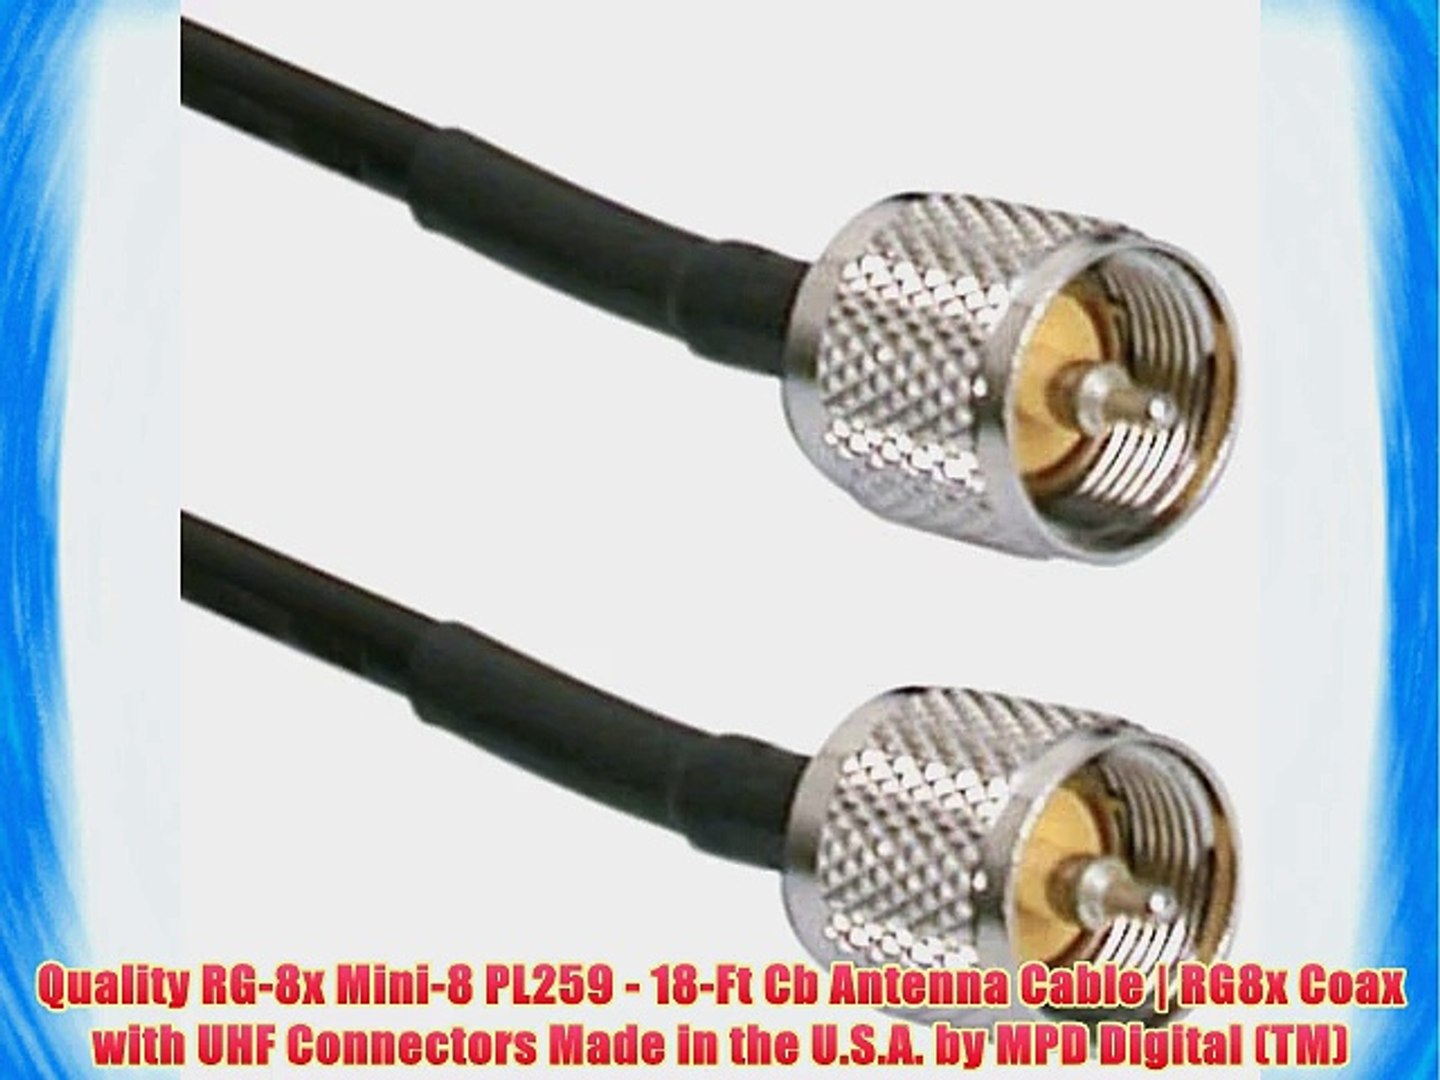 CB Radio Antenna VHF Coax Cable 50ft PL-259 Connectors